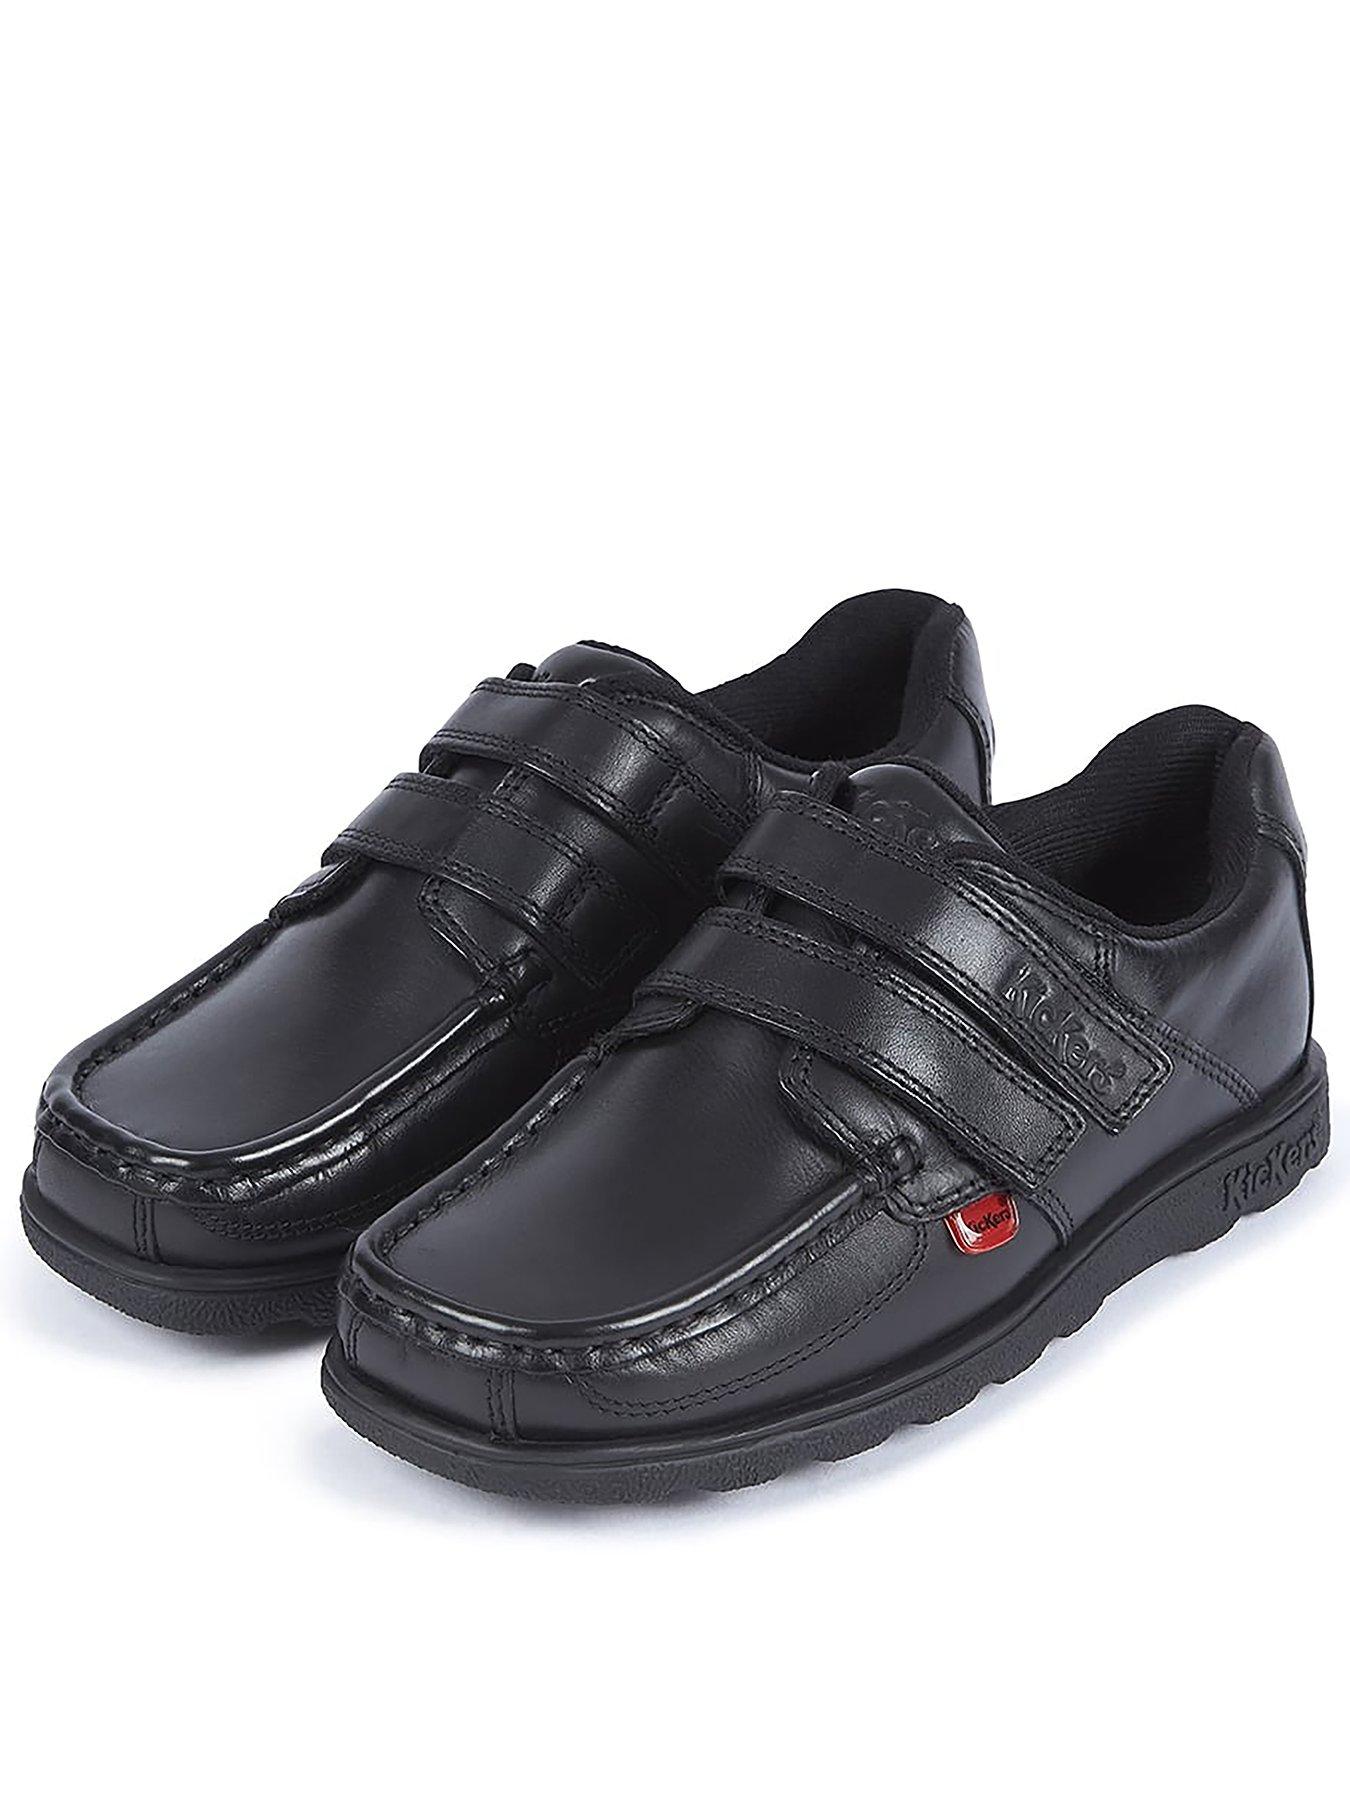 Kickers Boys Fragma Strap Teen Leather Shoes 